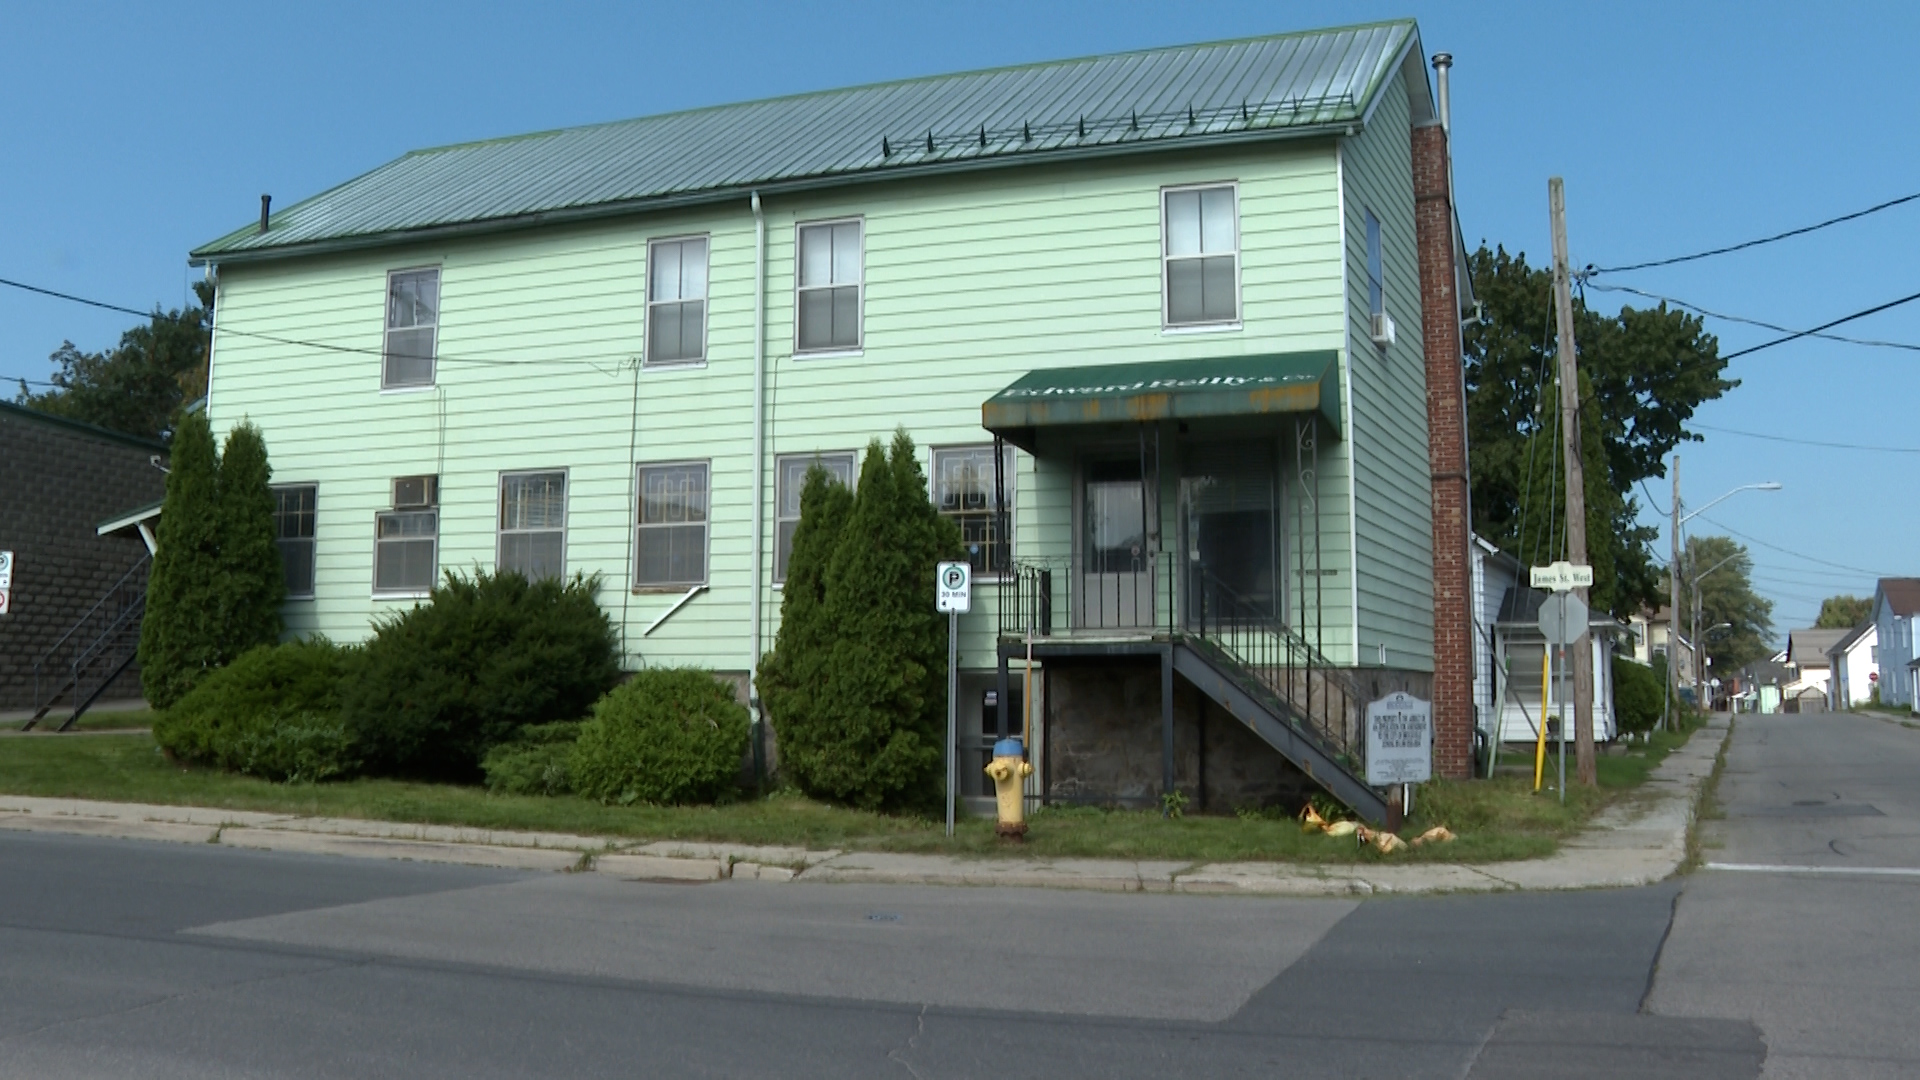 Proposed boarding house worries some Brockville residents